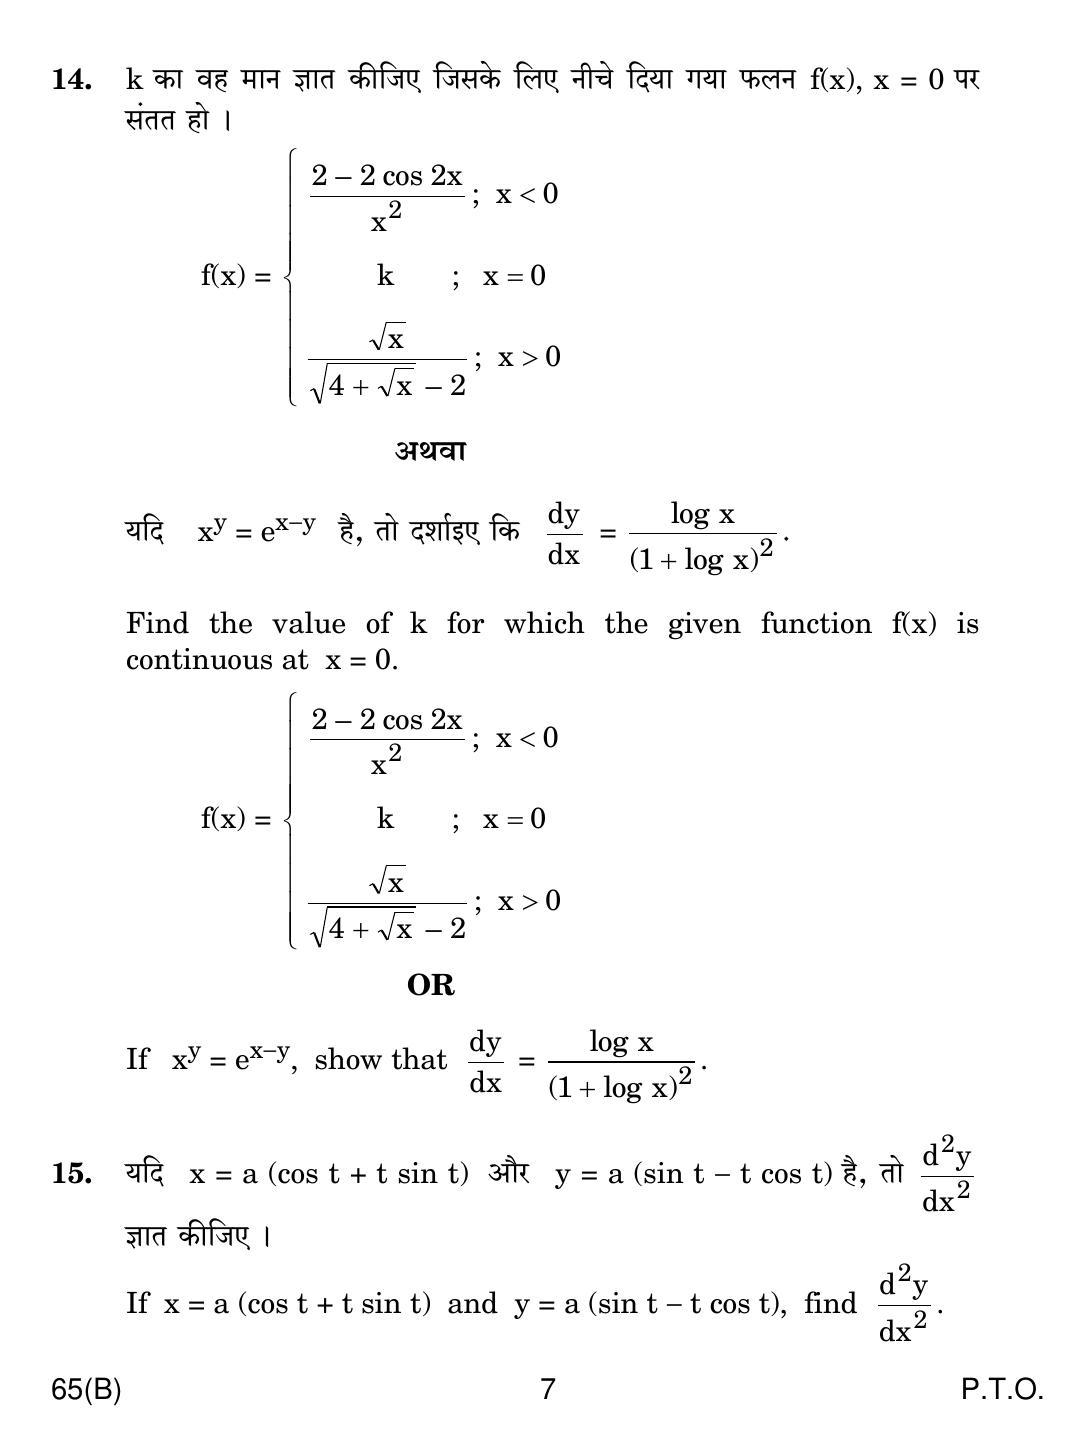 CBSE Class 12 65(B) MATHS FOR BLIND CANDIDATES 2018 Question Paper - Page 7